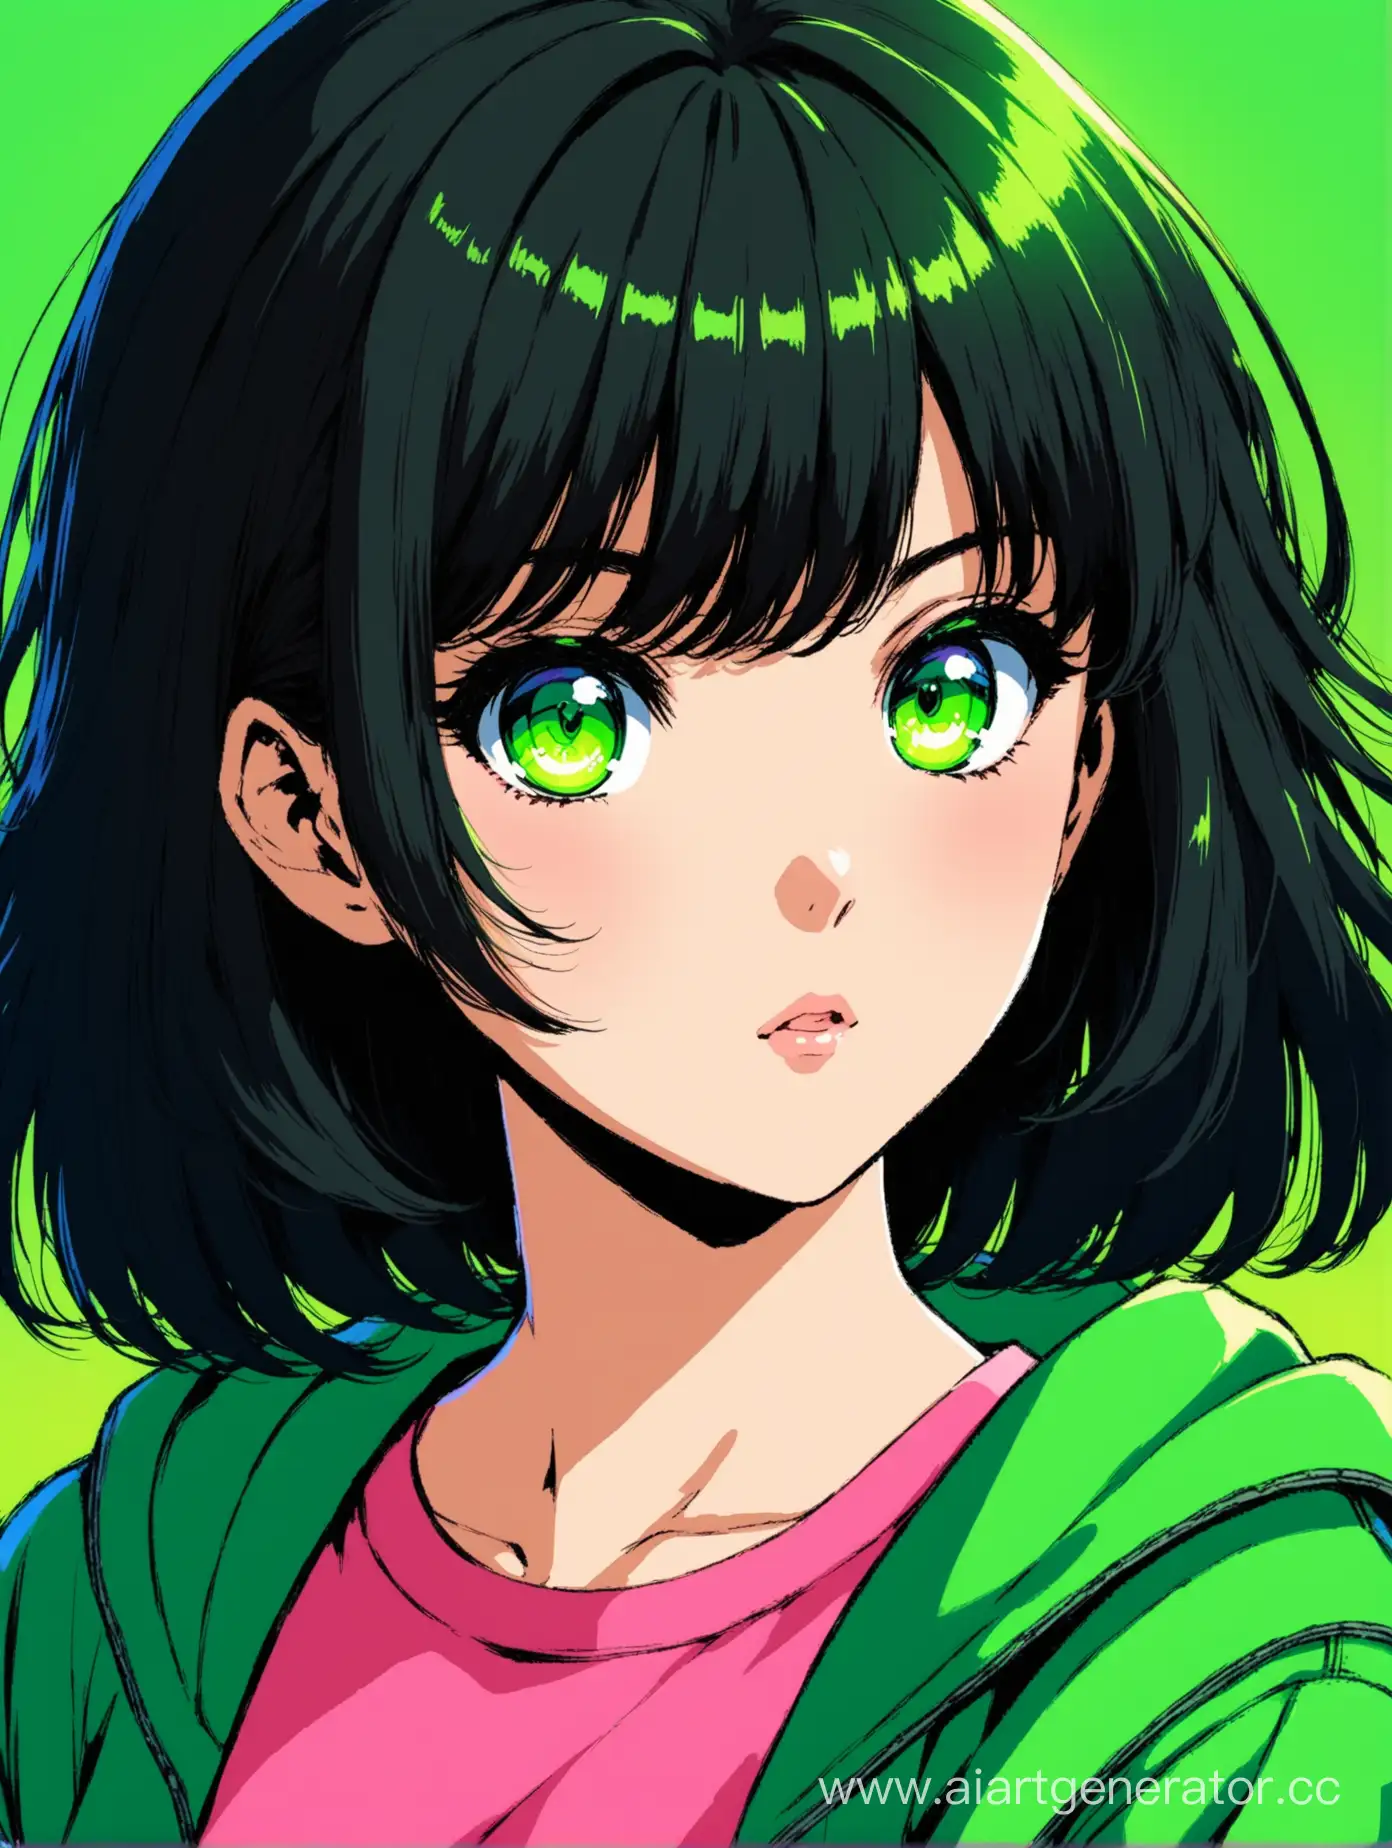 80s-Anime-Girl-with-Black-Bobbed-Hair-and-Green-Eyes